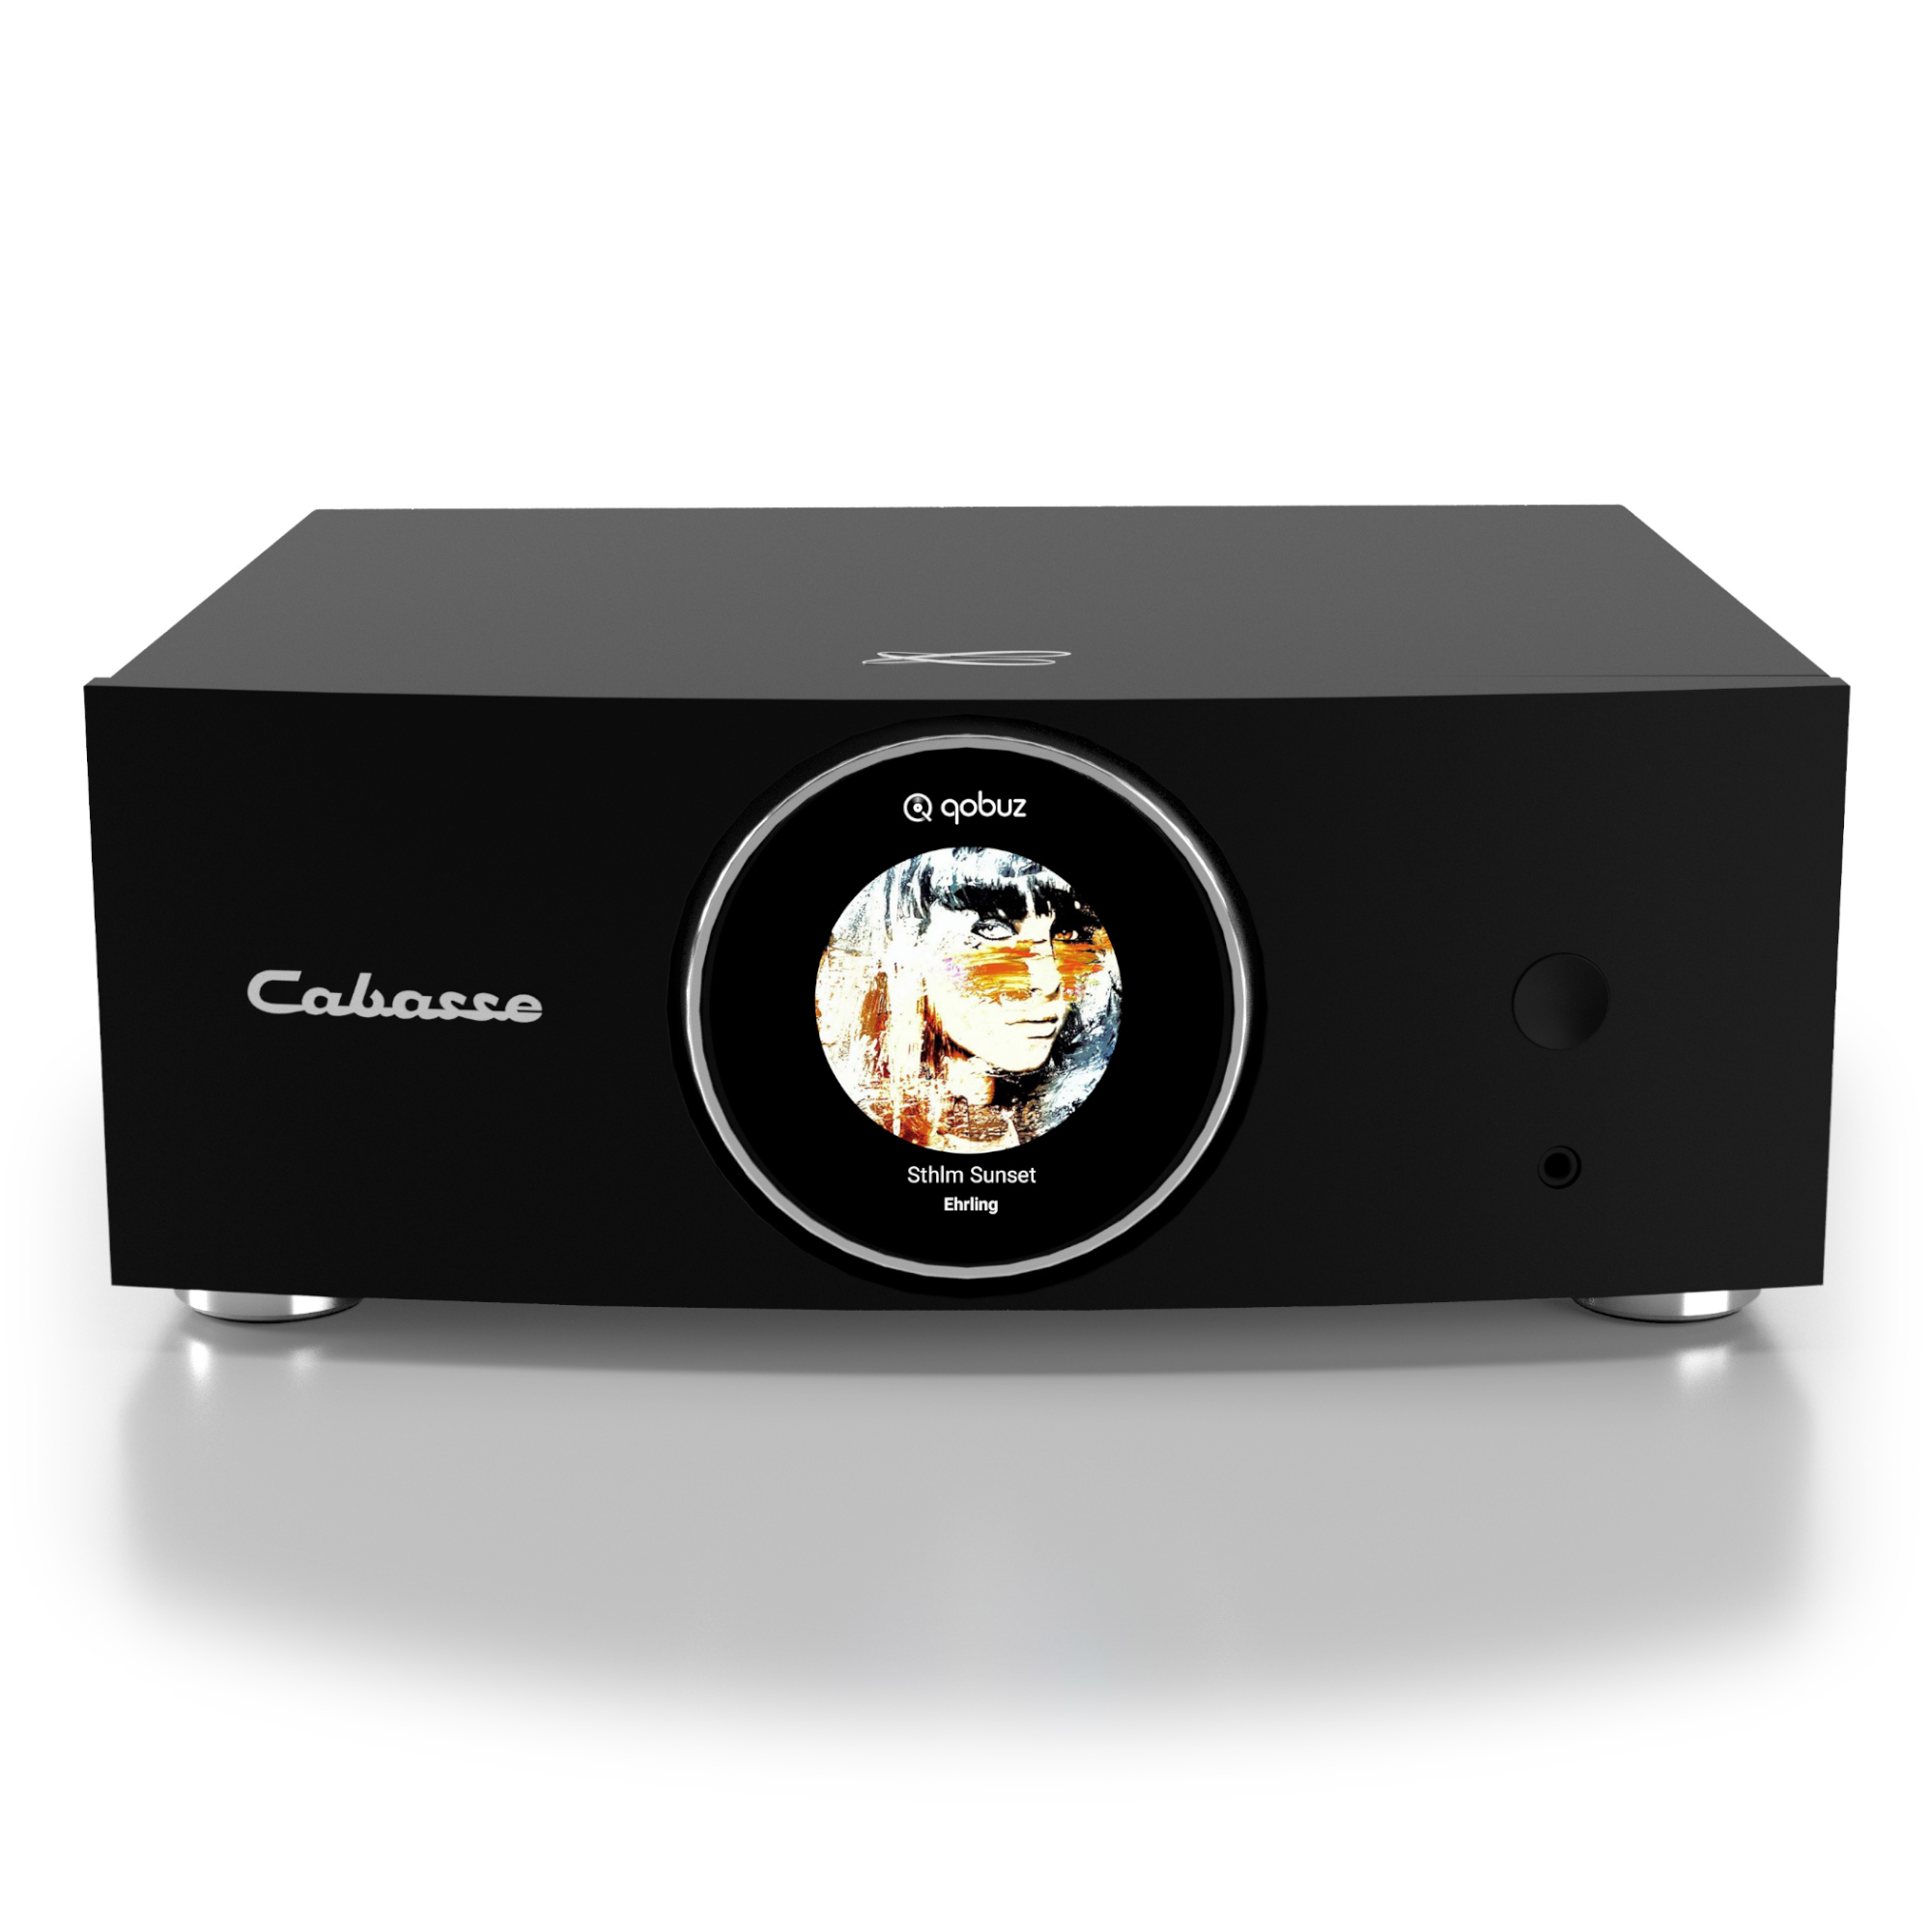 THE PEARL PELEGRINA: A new HiFi Masterpiece from Cabasse